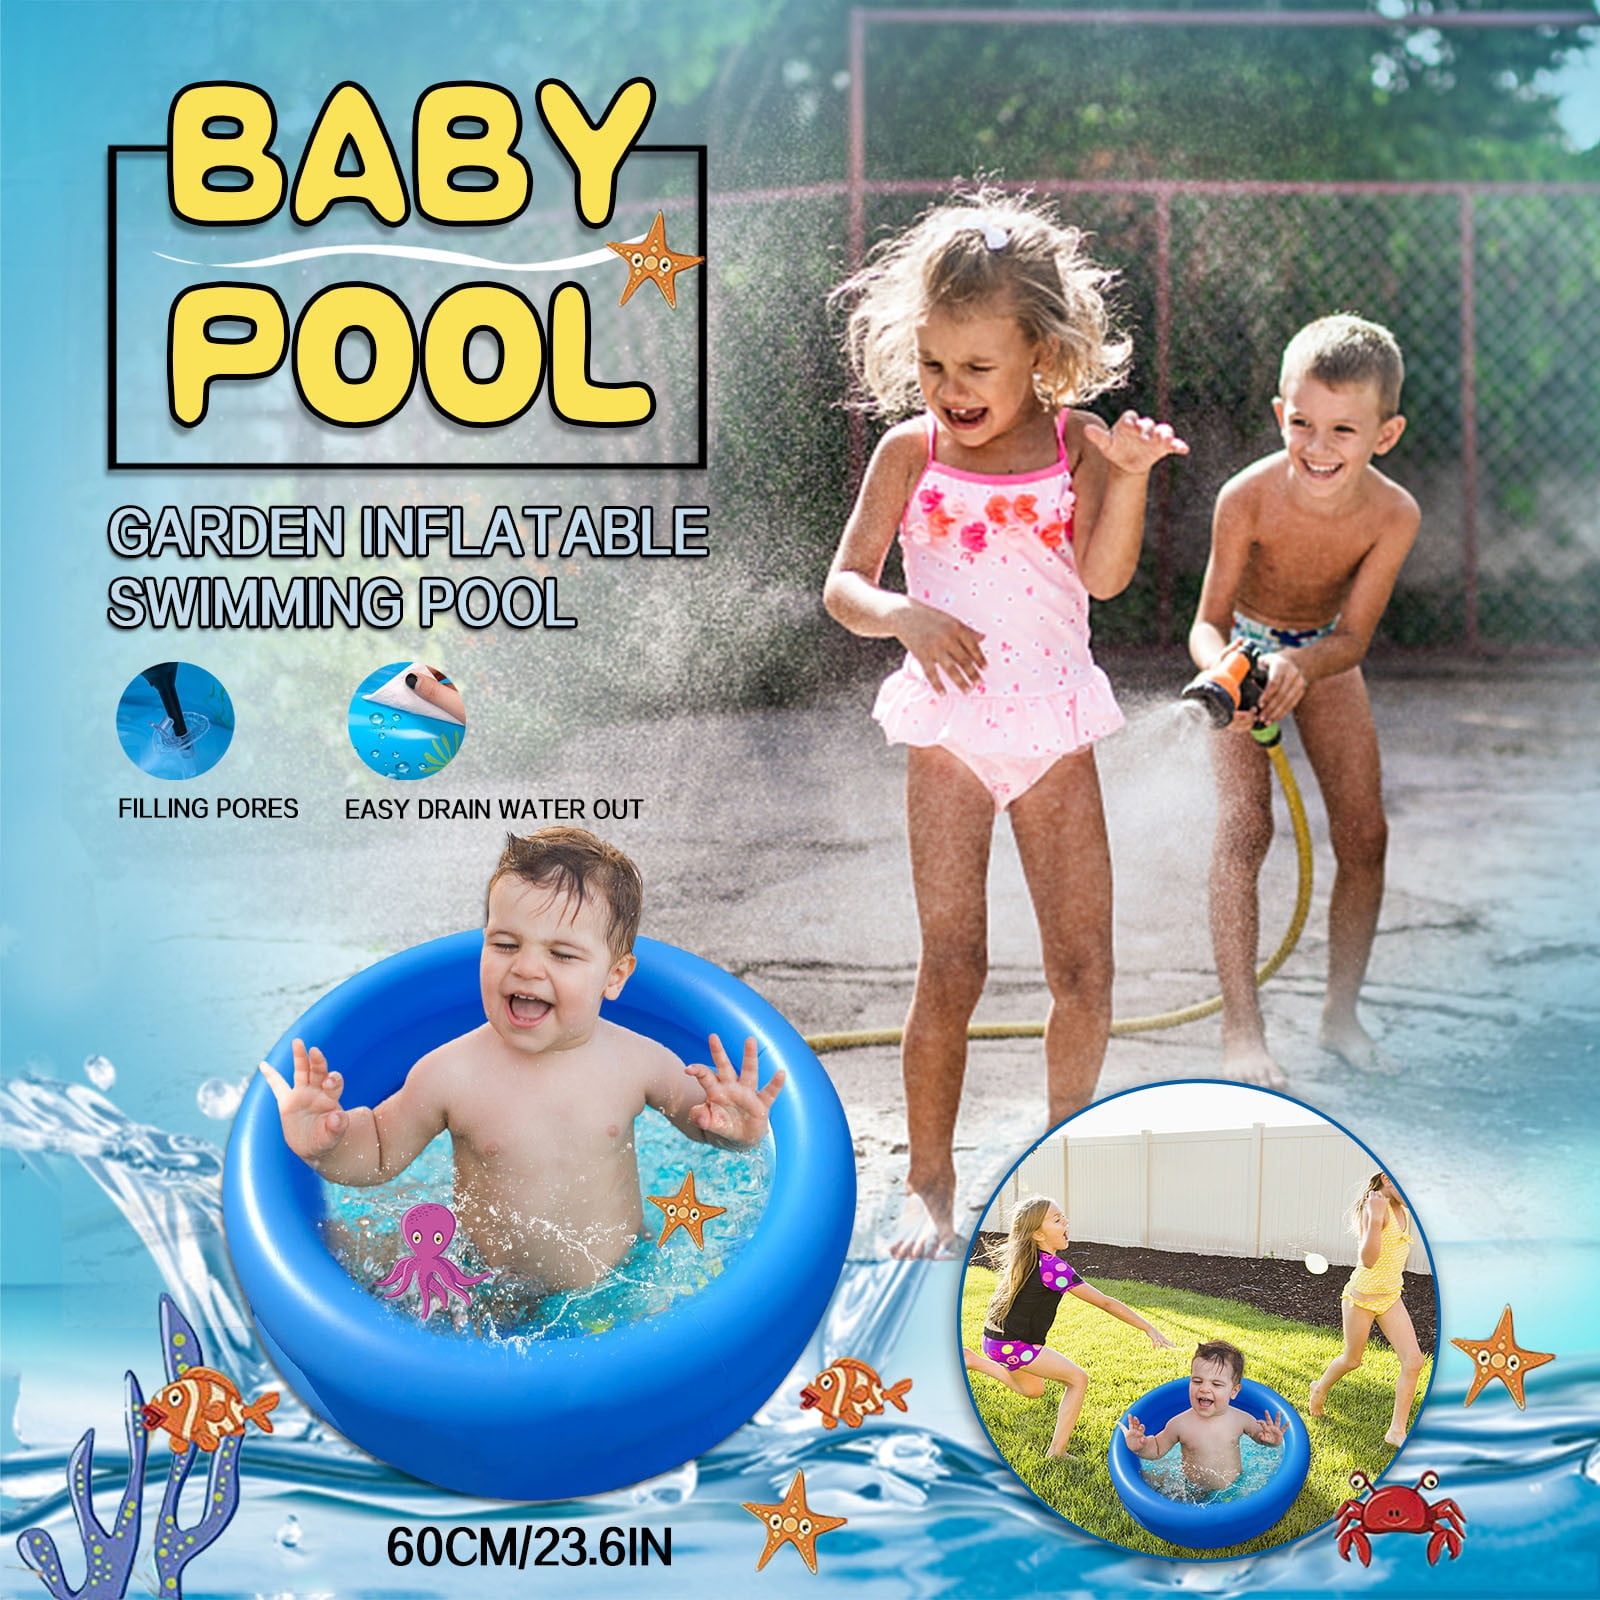 Details about   Disney Splash Play Water Swim Ring Ball Summer Games Swimming Pool Accessories 